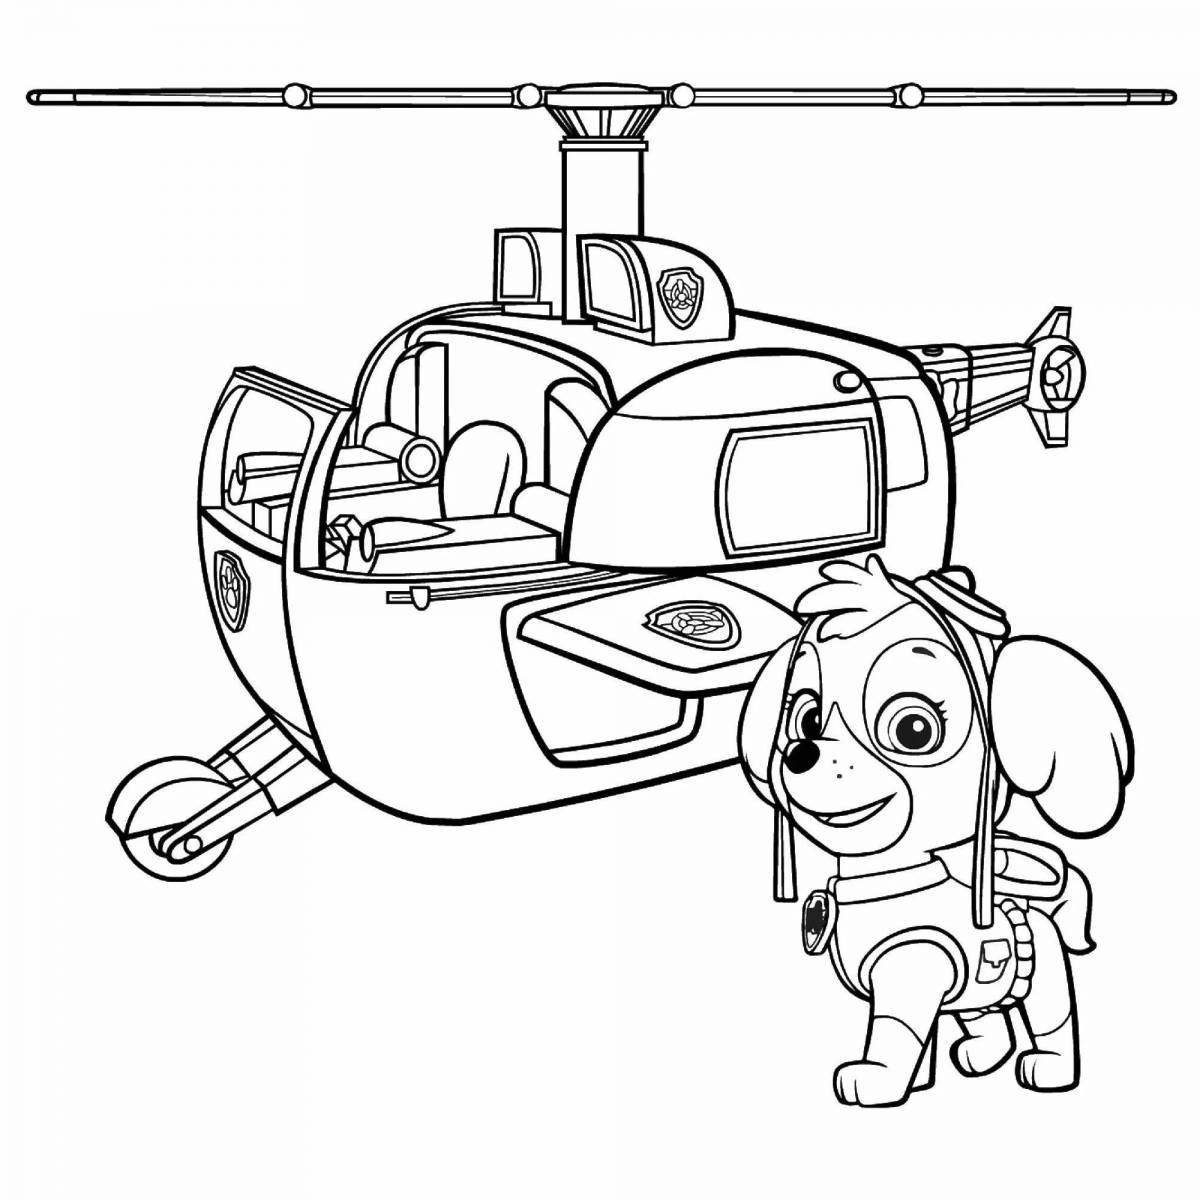 Mystical rescue helicopter coloring page